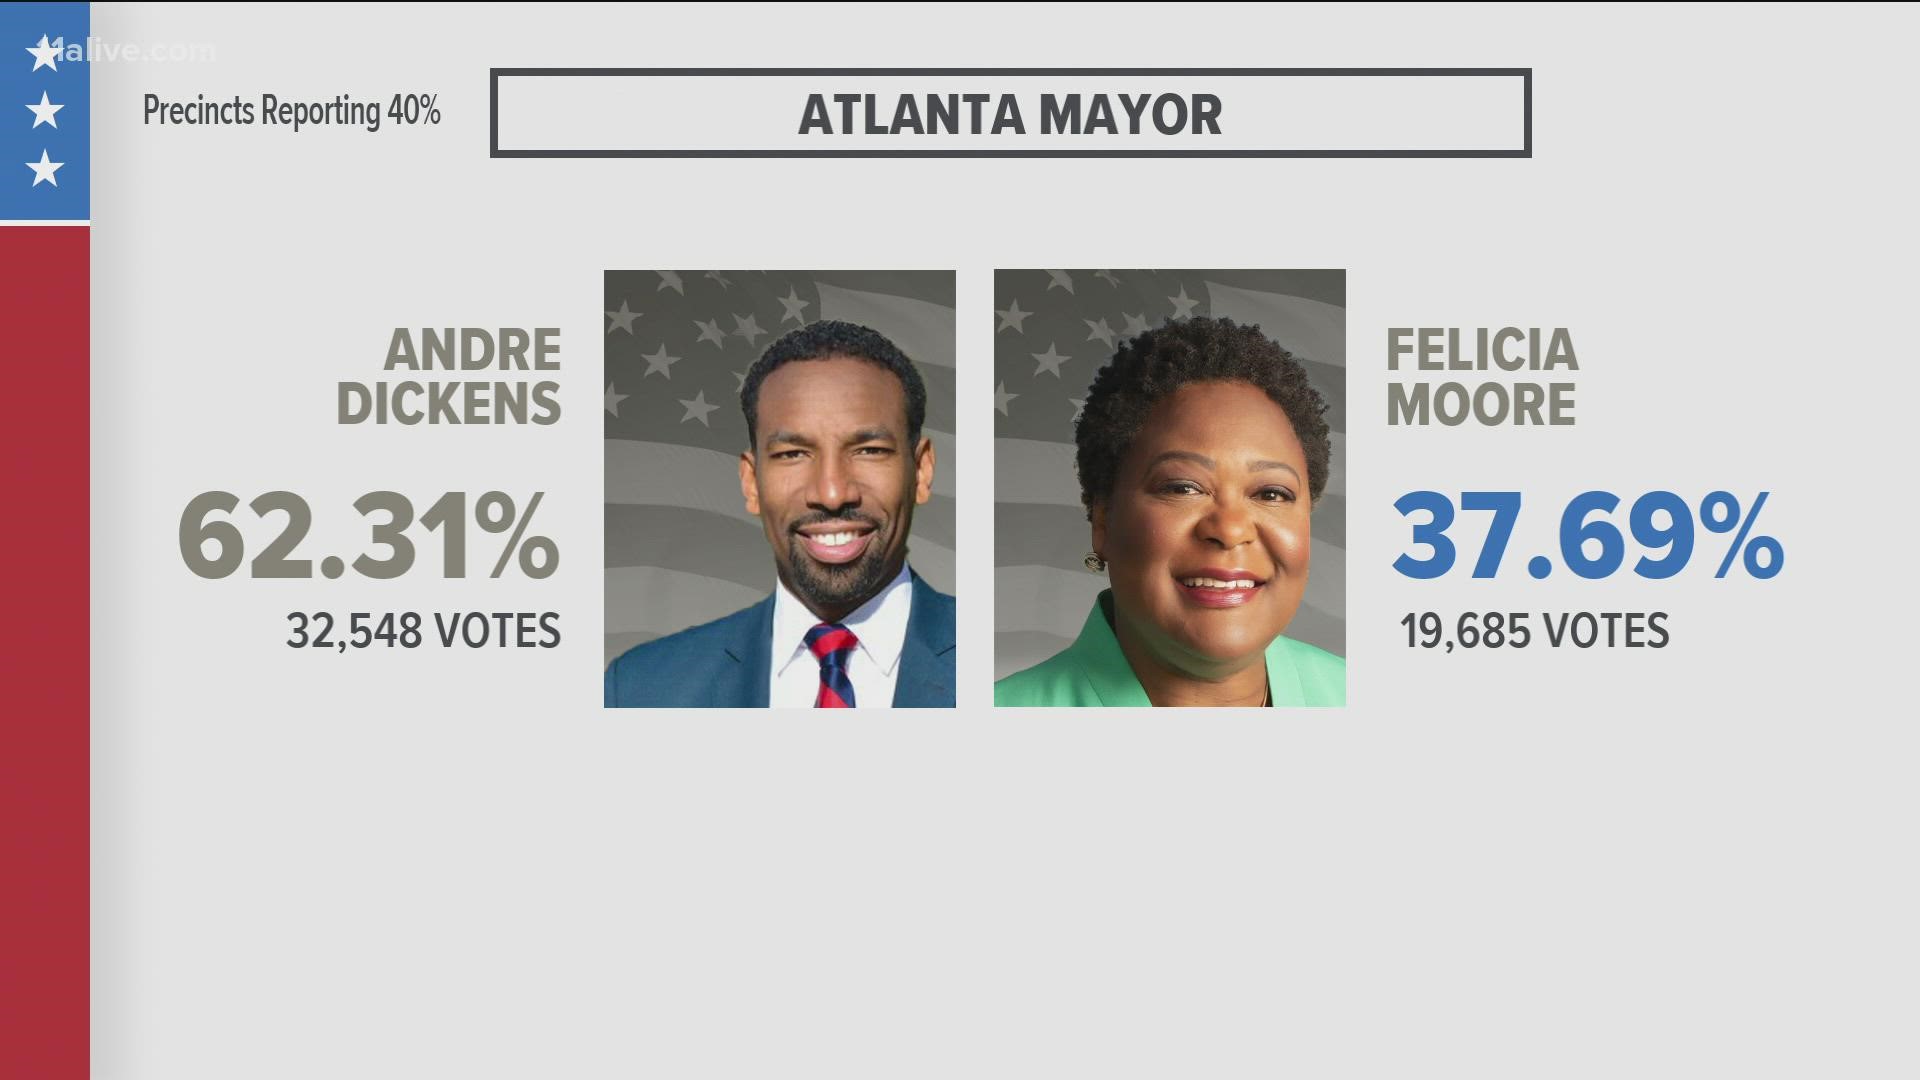 Andre Dickens will be Atlanta's next mayor, the Associated Press declared. The results will become official after being certified by the Georgia Secretary of State.